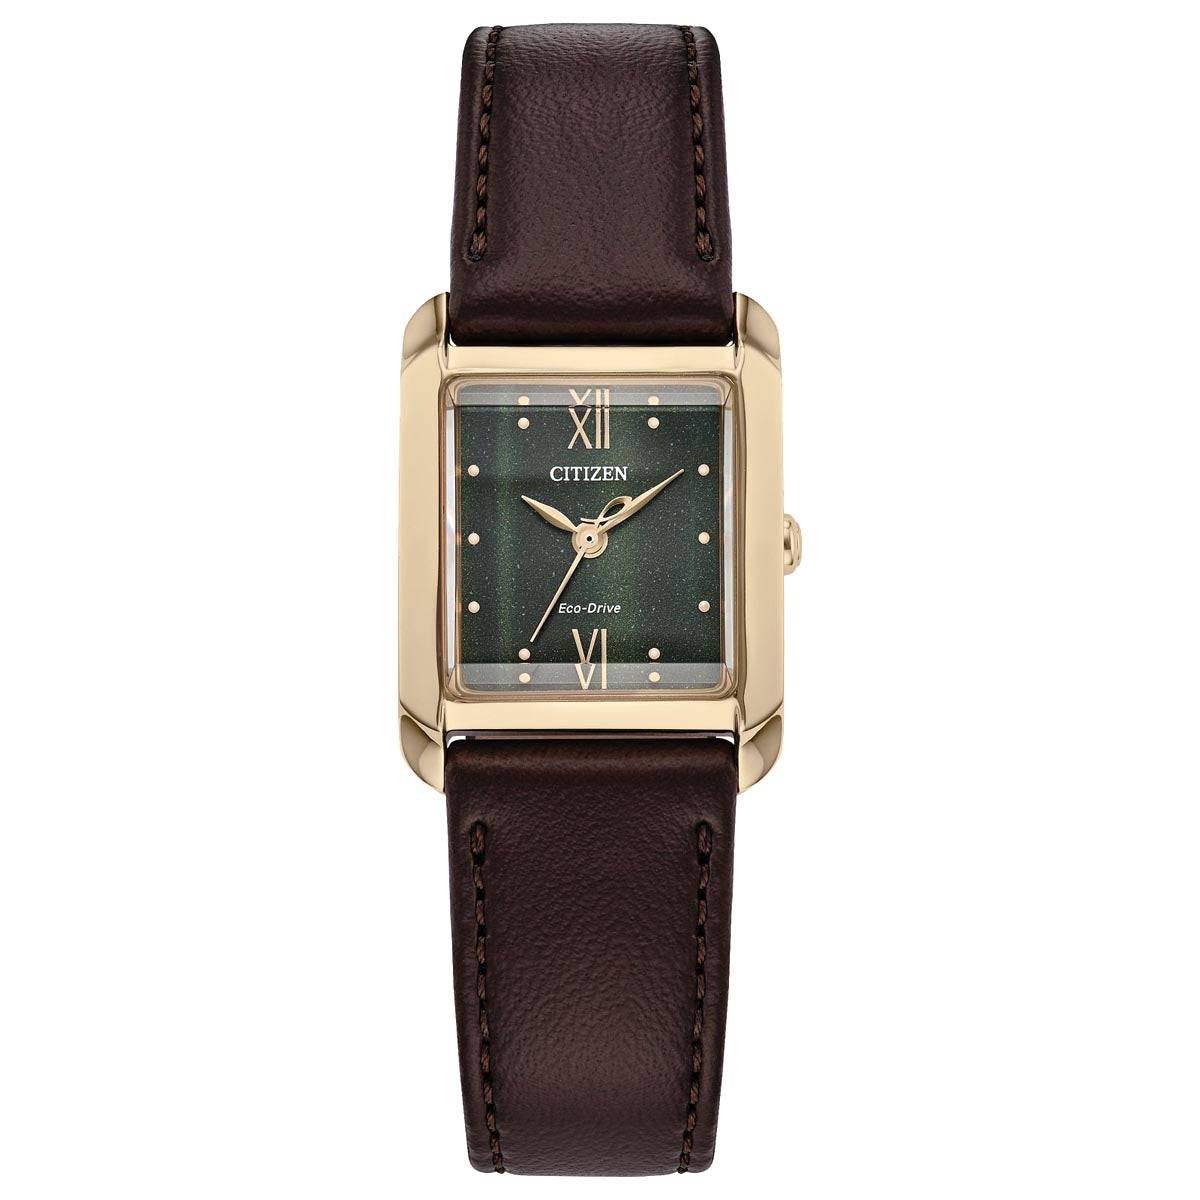 Citizen Bianca Womens Watch with Green Dial and Brown Leather Strap (eco drive movement)